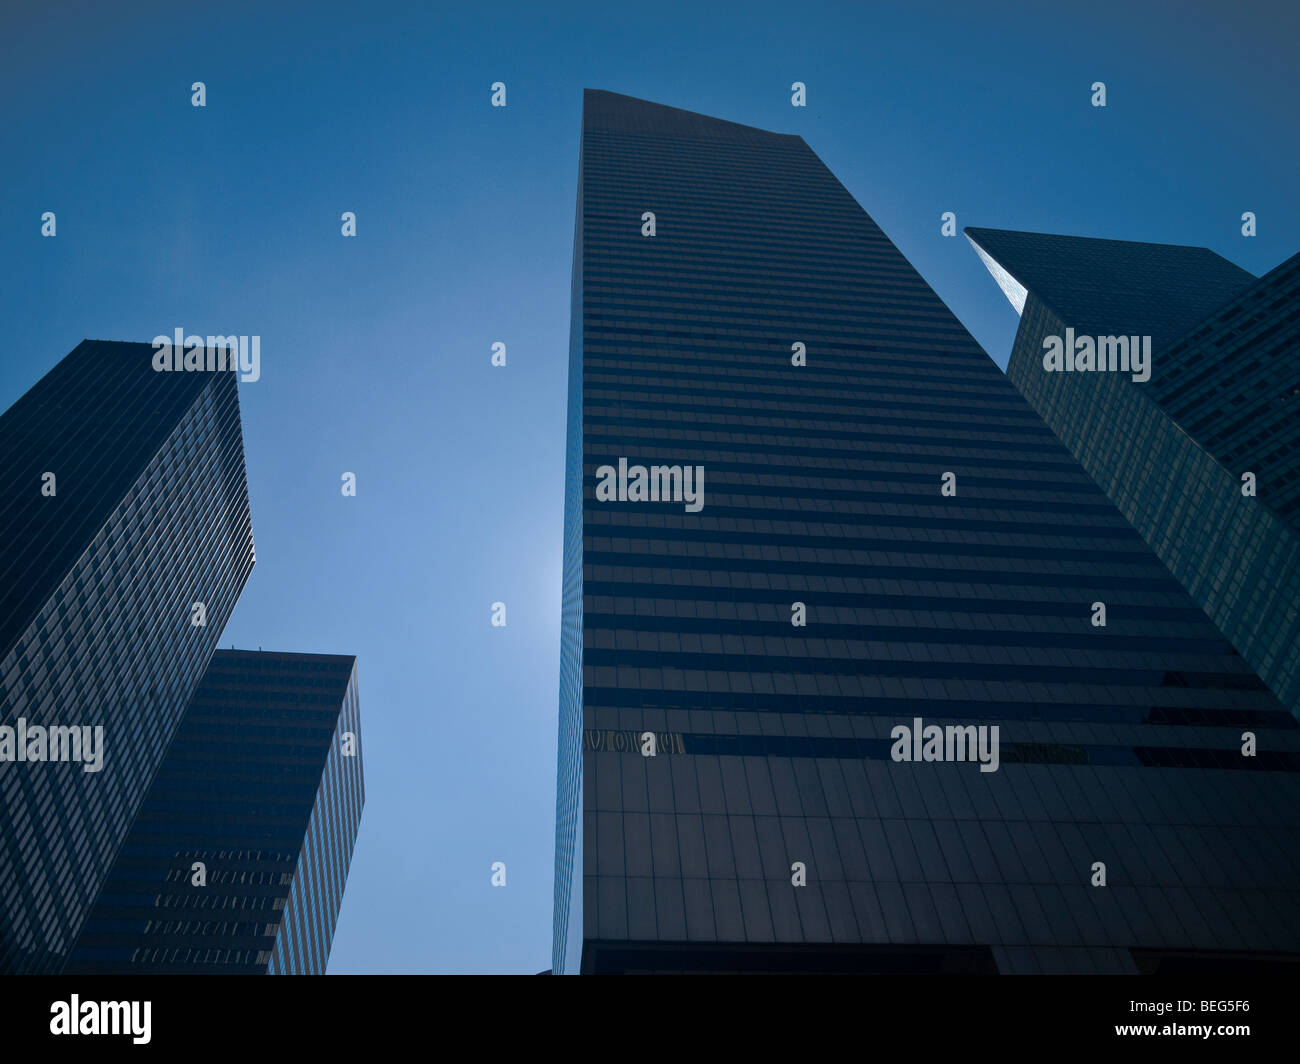 High modern skyscrapers on a background of a blue sky. Stock Photo